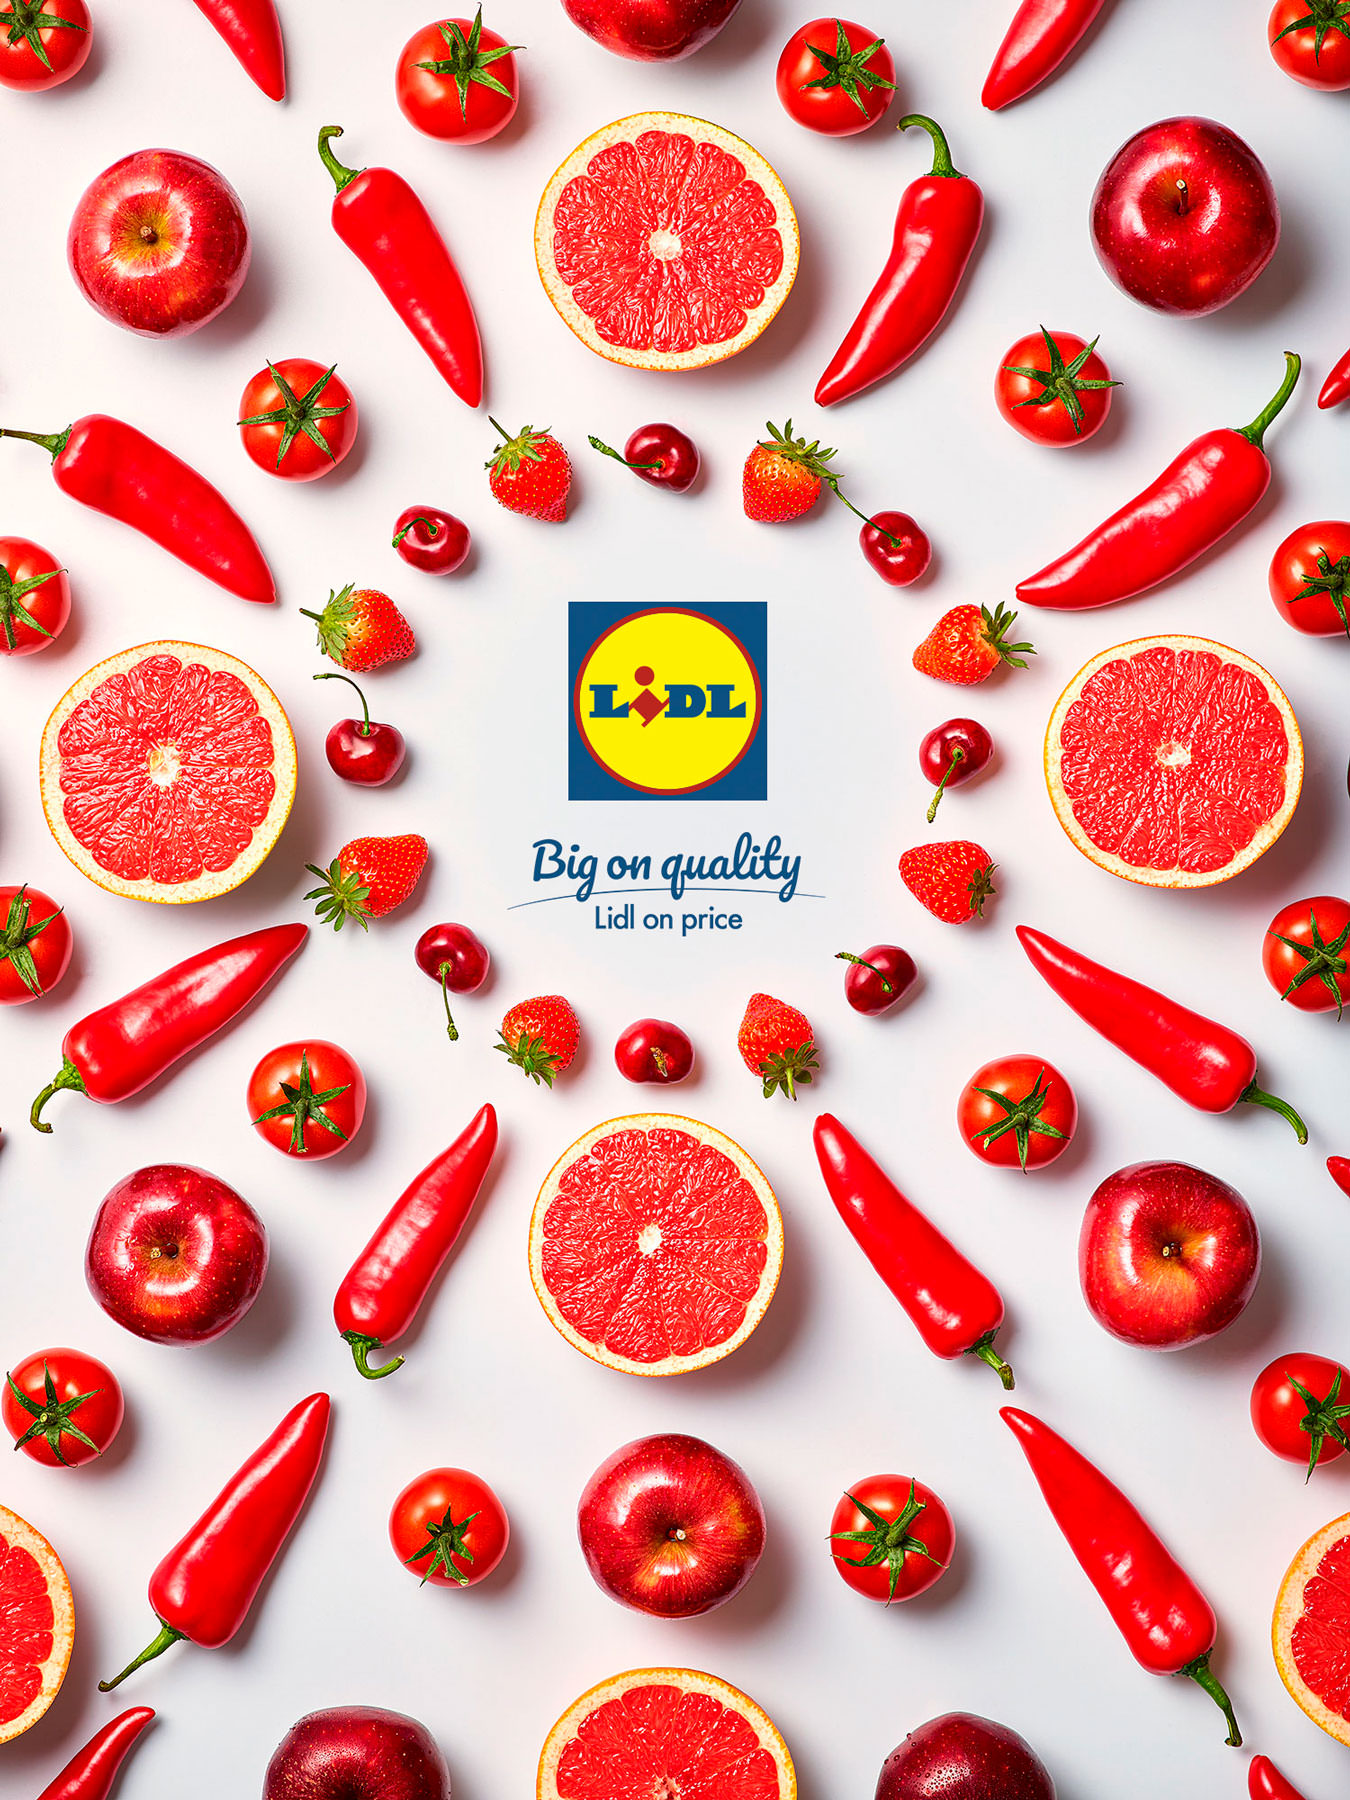 Red Chillis, red grapefruit, red apples, and tomatoes arranged graphically in a spiral with lidl logo in the middle. - London Food & Drinks Photographer